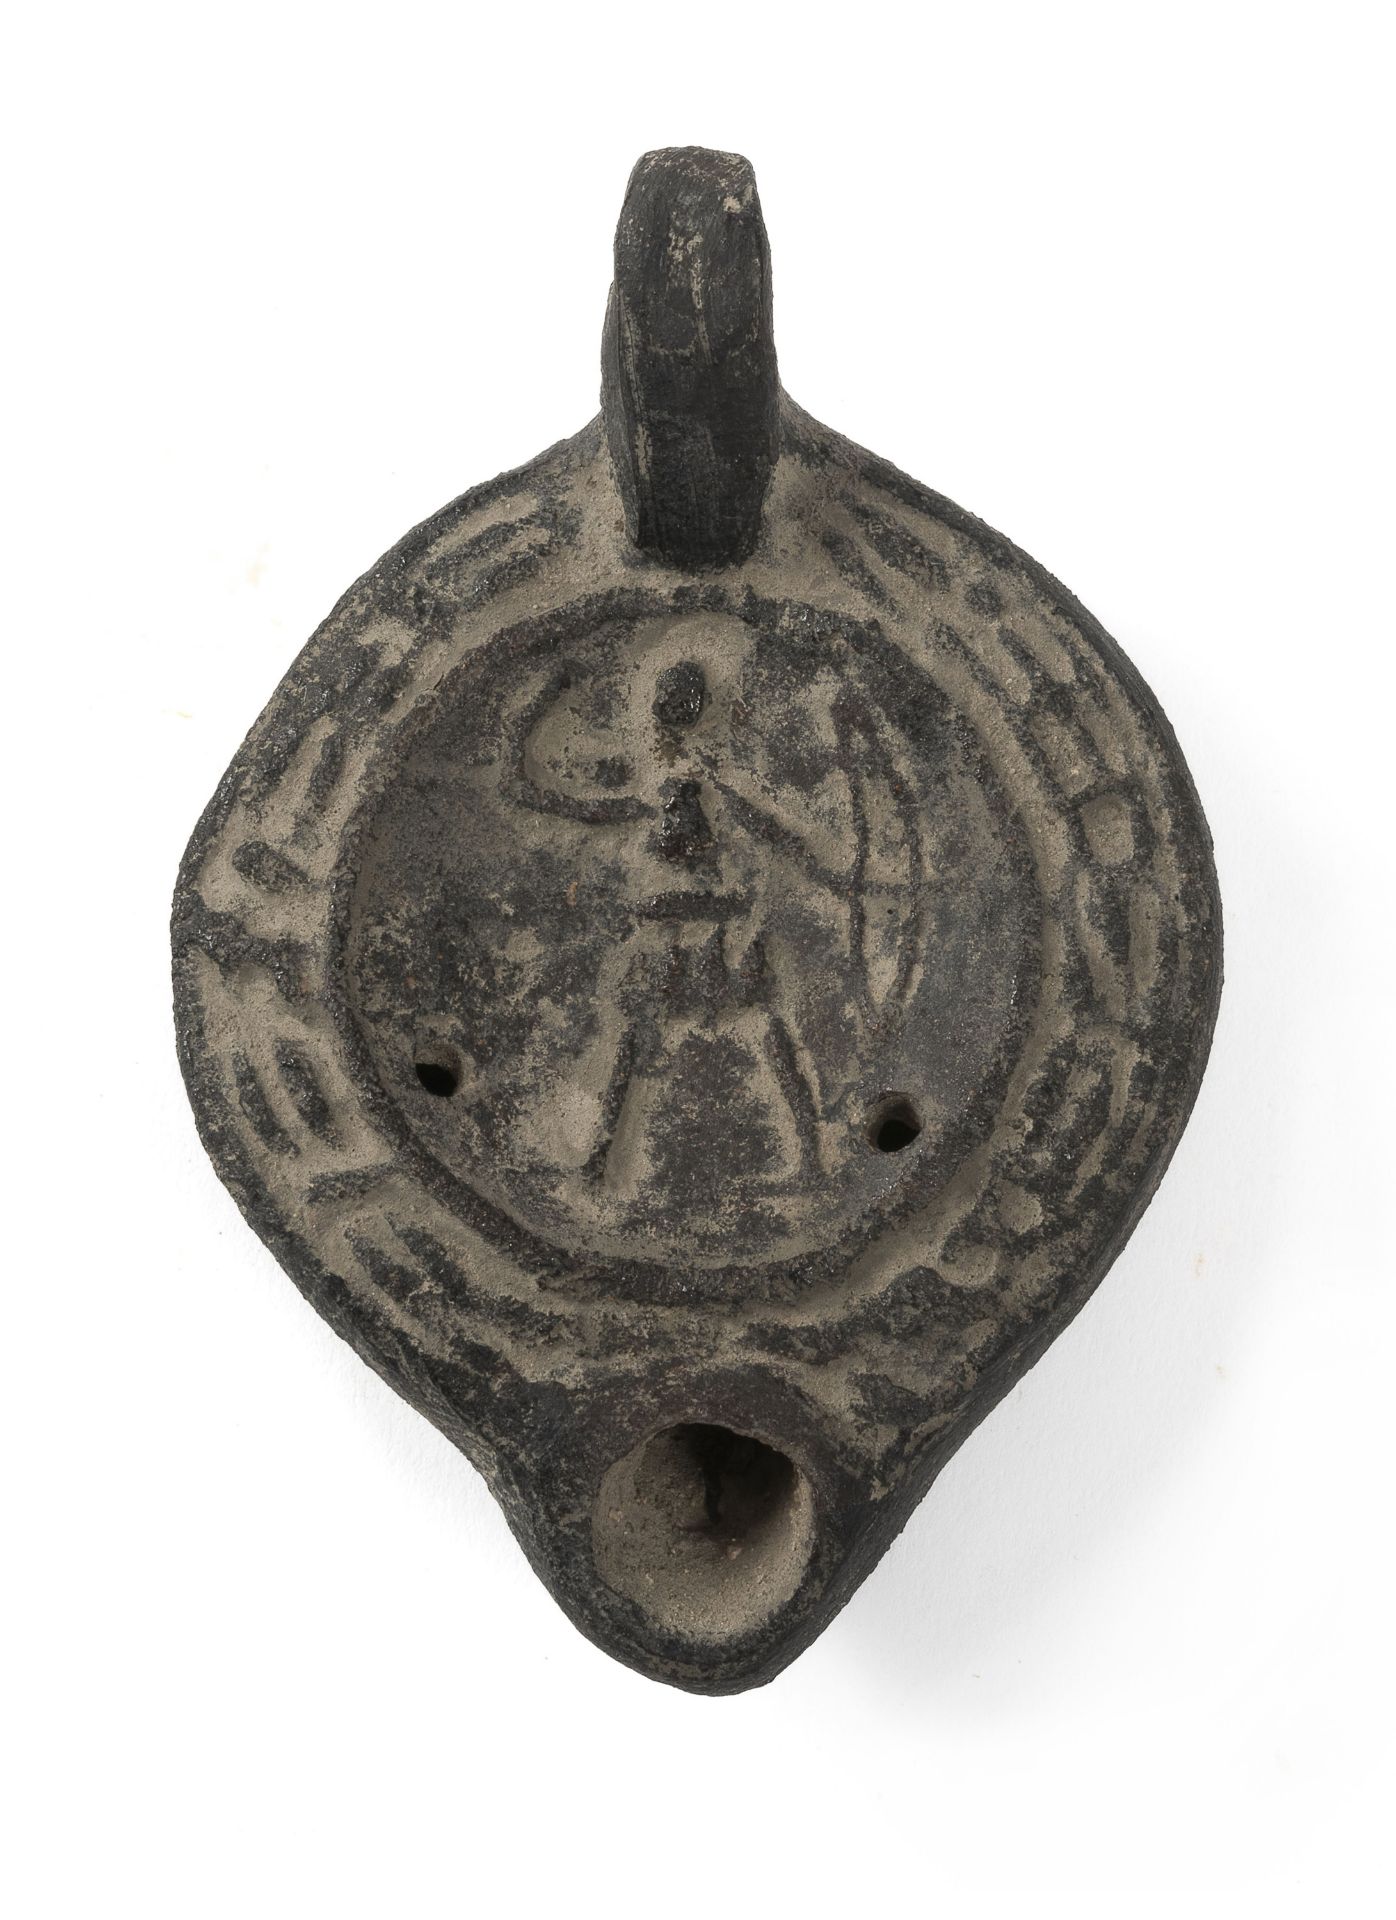 OIL LAMP IN ARCHAEOLOGICAL STYLE END OF THE 19TH CENTURY